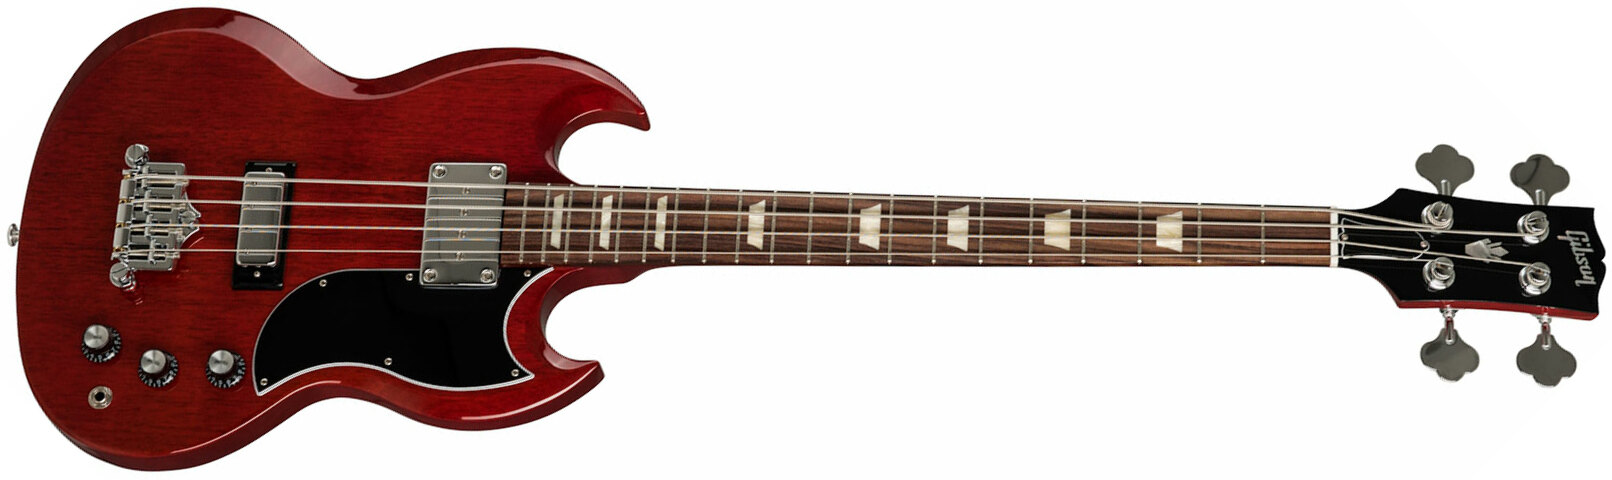 Gibson Sg Standard Bass Original Short Scale Rw - Heritage Cherry - Solid body electric bass - Main picture